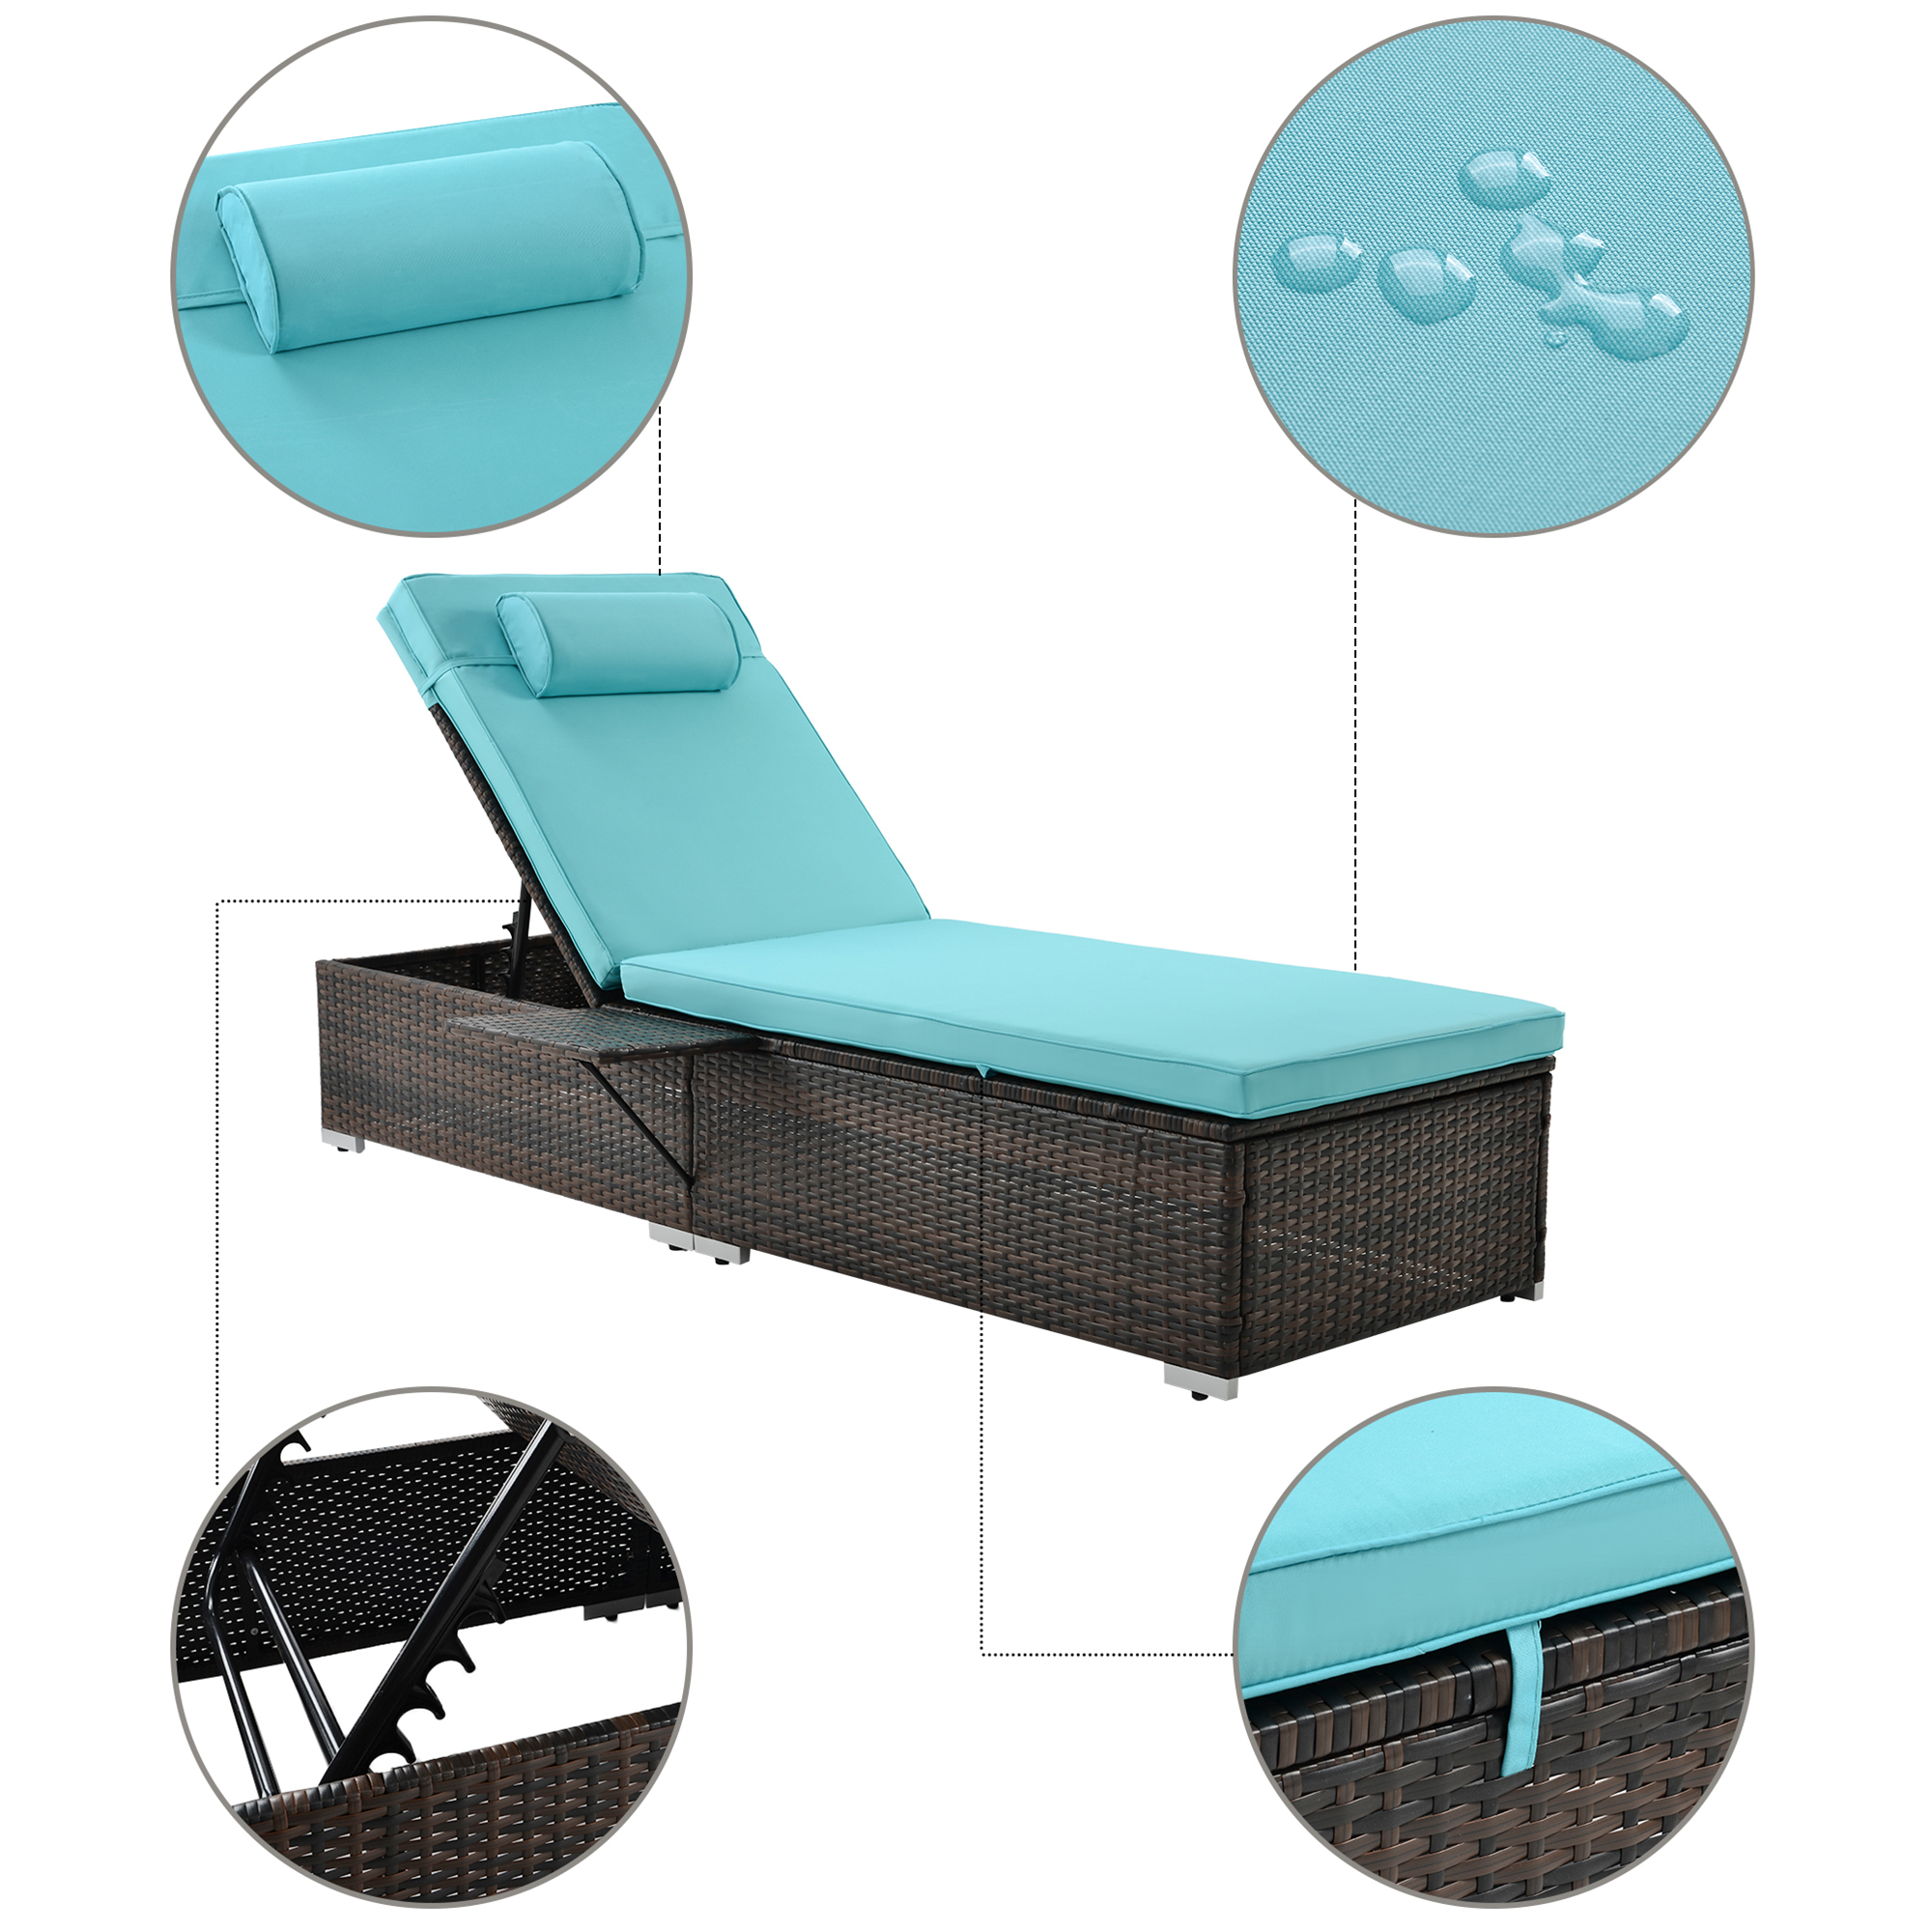 Outdoor PE Wicker Chaise Lounge - 2 Piece Patio Brown Rattan Reclining Chair Furniture Set Beach Pool Adjustable Backrest Recliners with Side Table and Comfort Head Pillow - image 3 of 7